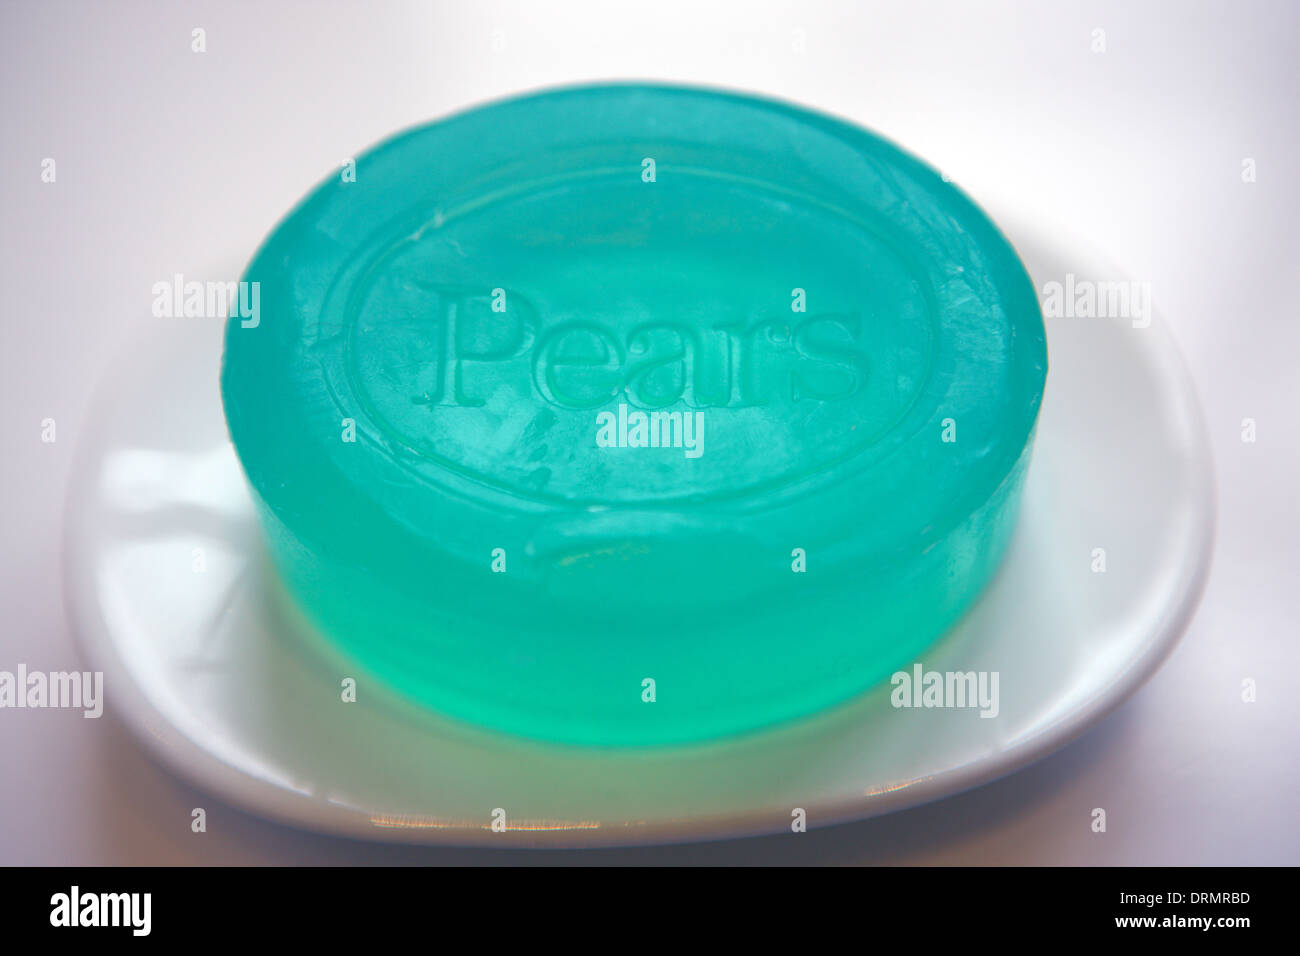 Pears green soap on a white soap dish Stock Photo - Alamy